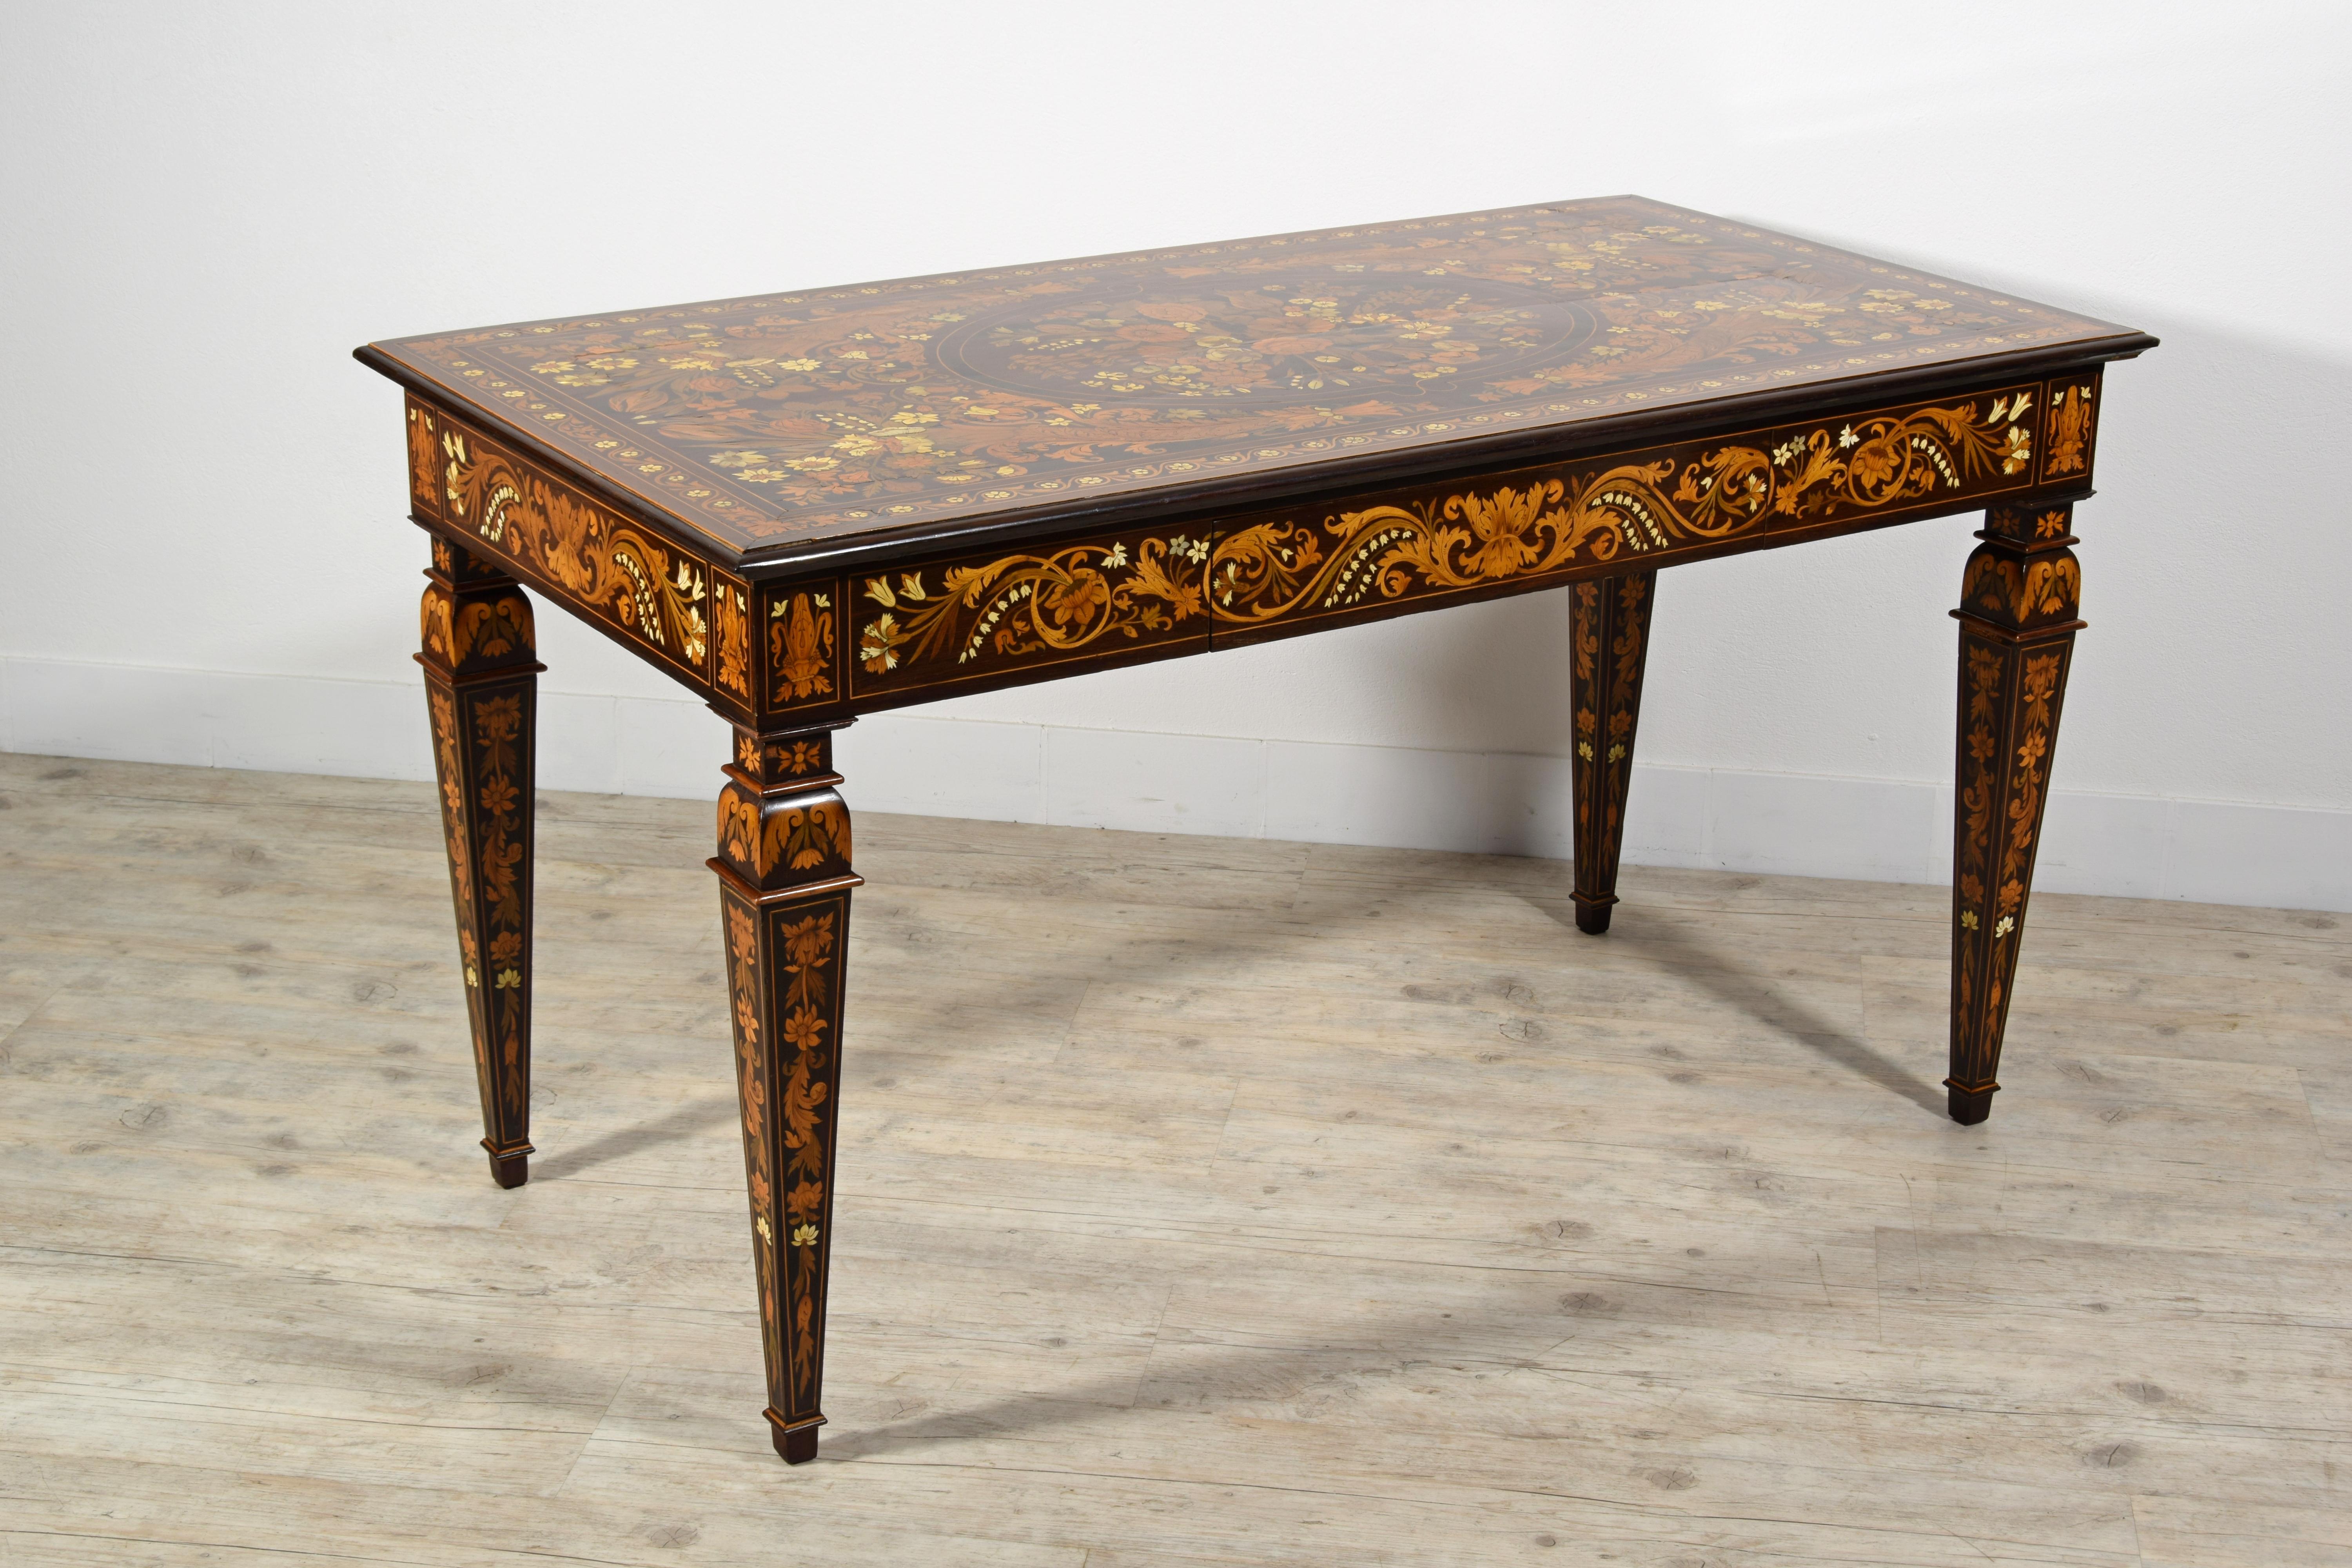 19th Century, Italian Inlaid Wood Centre Table by Luigi and Angiolo Falcini For Sale 2